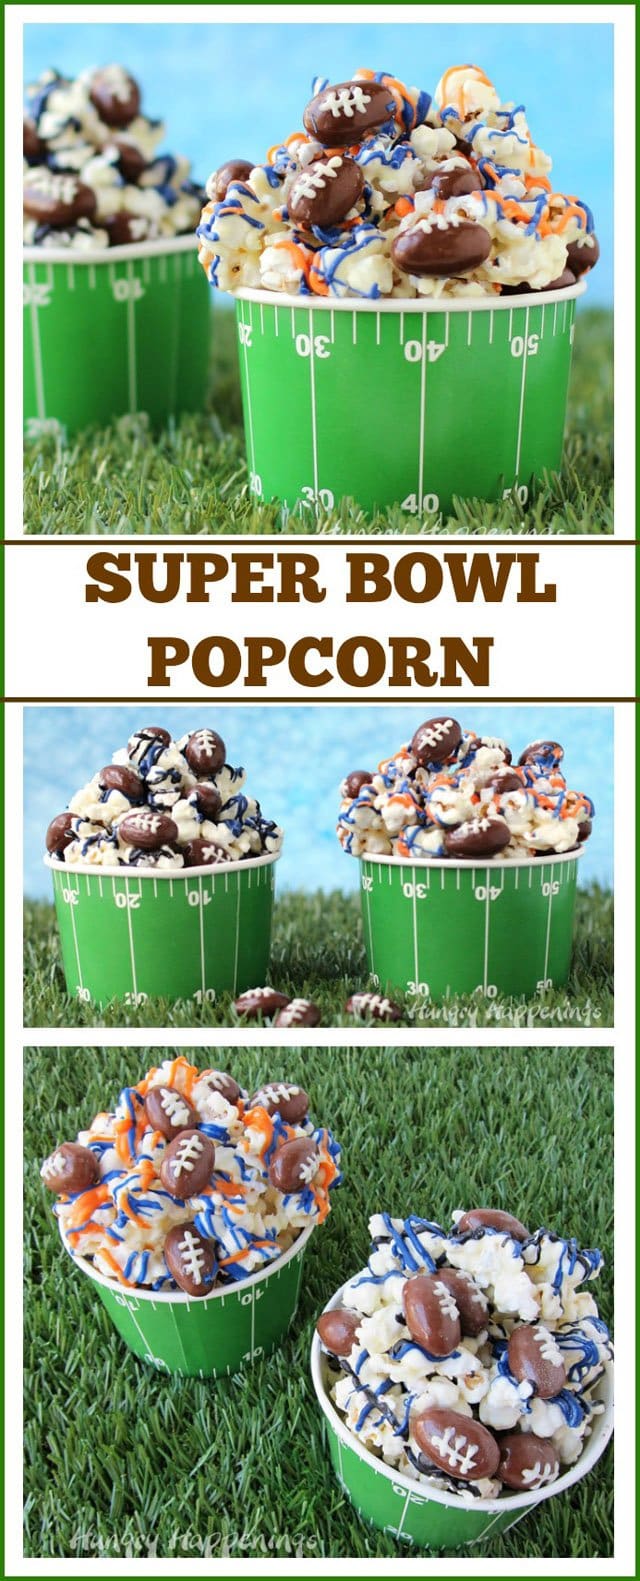 Add your favorite team's colors to white chocolate popcorn and toss in some chocolate almond footballs festive Super Bowl snack. See how at HungryHappenings.com.